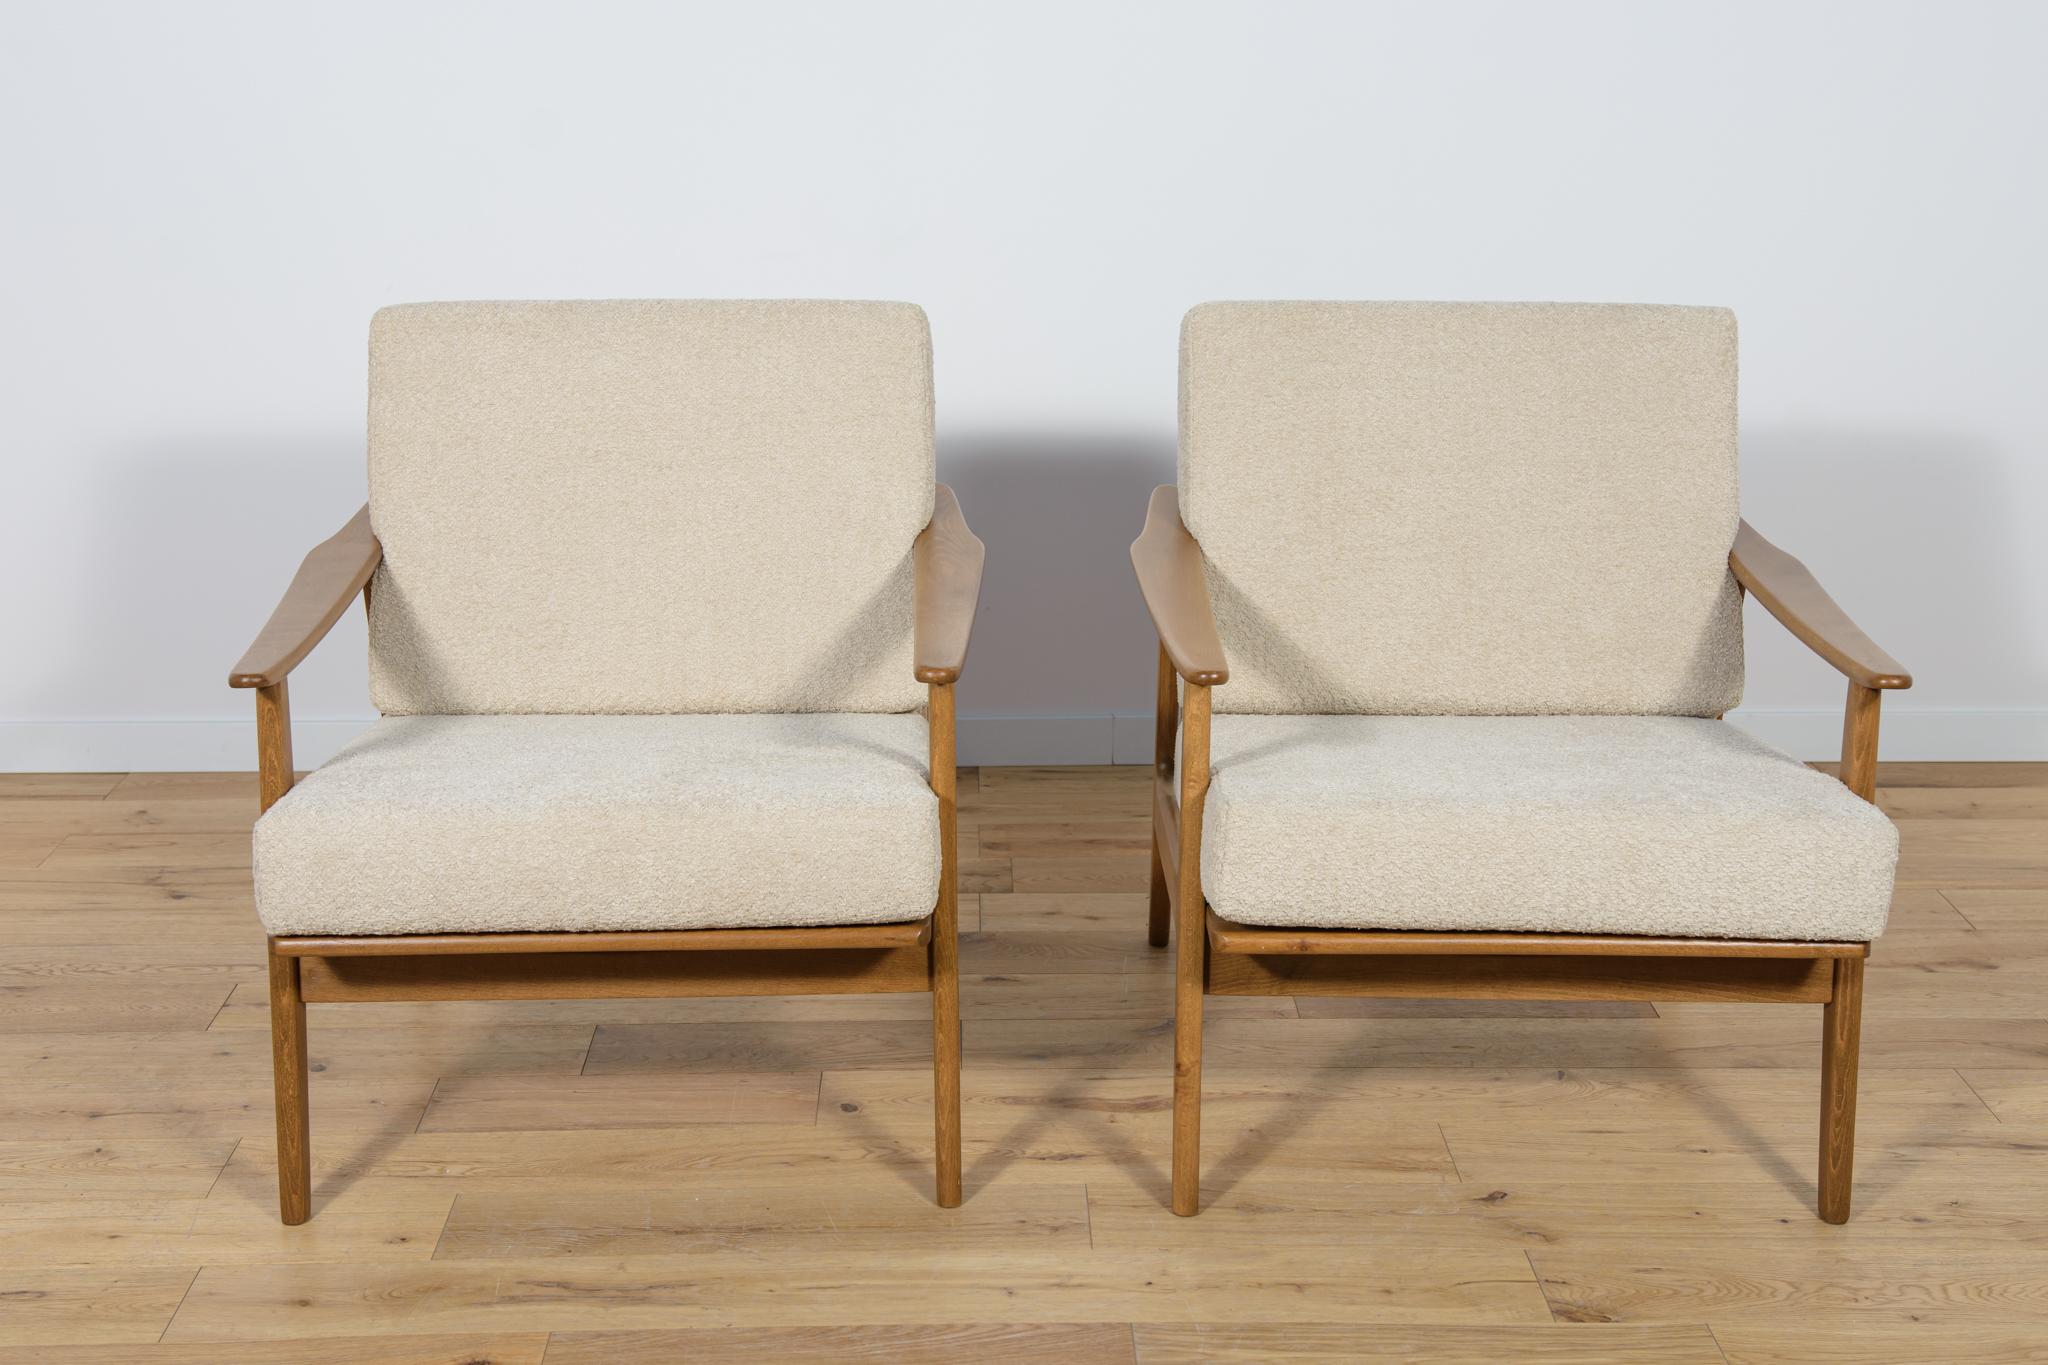 A pair of Model 5825 armchairs manufactured in the 1960s. Armchairs with a unique Scandinavian form. The armchairs have undergone professional carpentry and upholstery renovation. The beech wood was cleaned from the old surface, painted with an